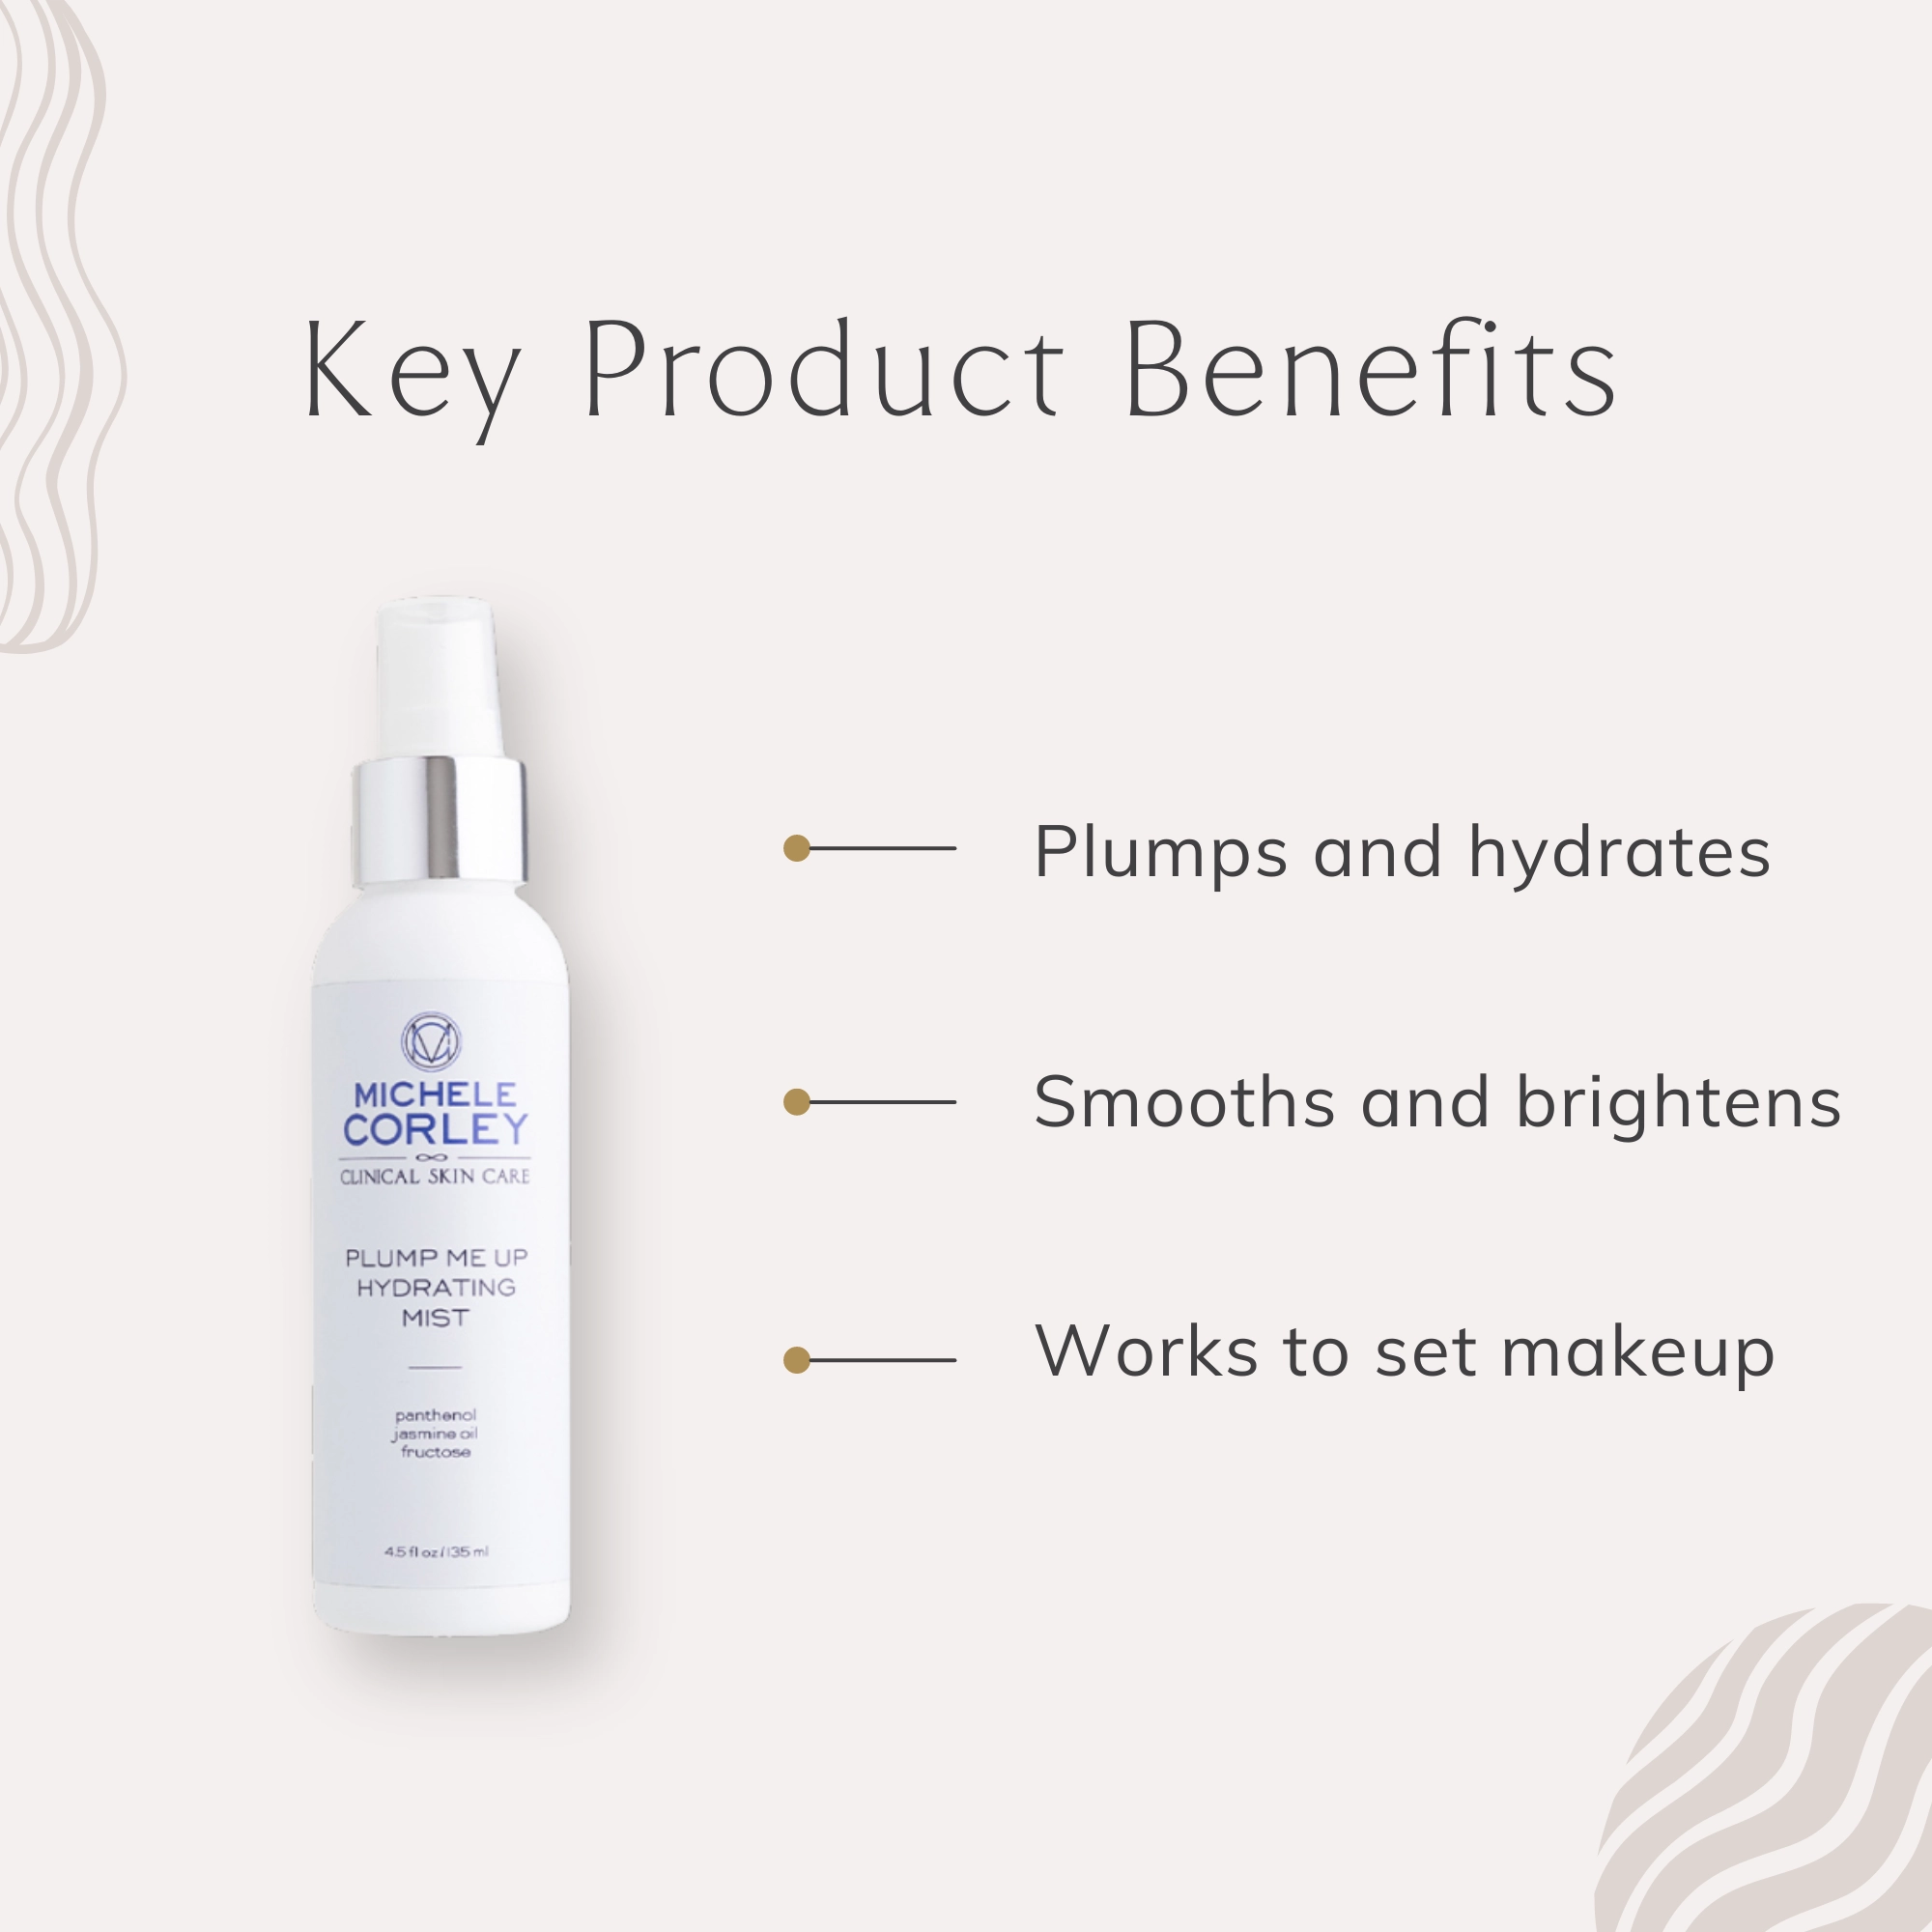 Michele Corley Plump Me Up Hydrating Mist